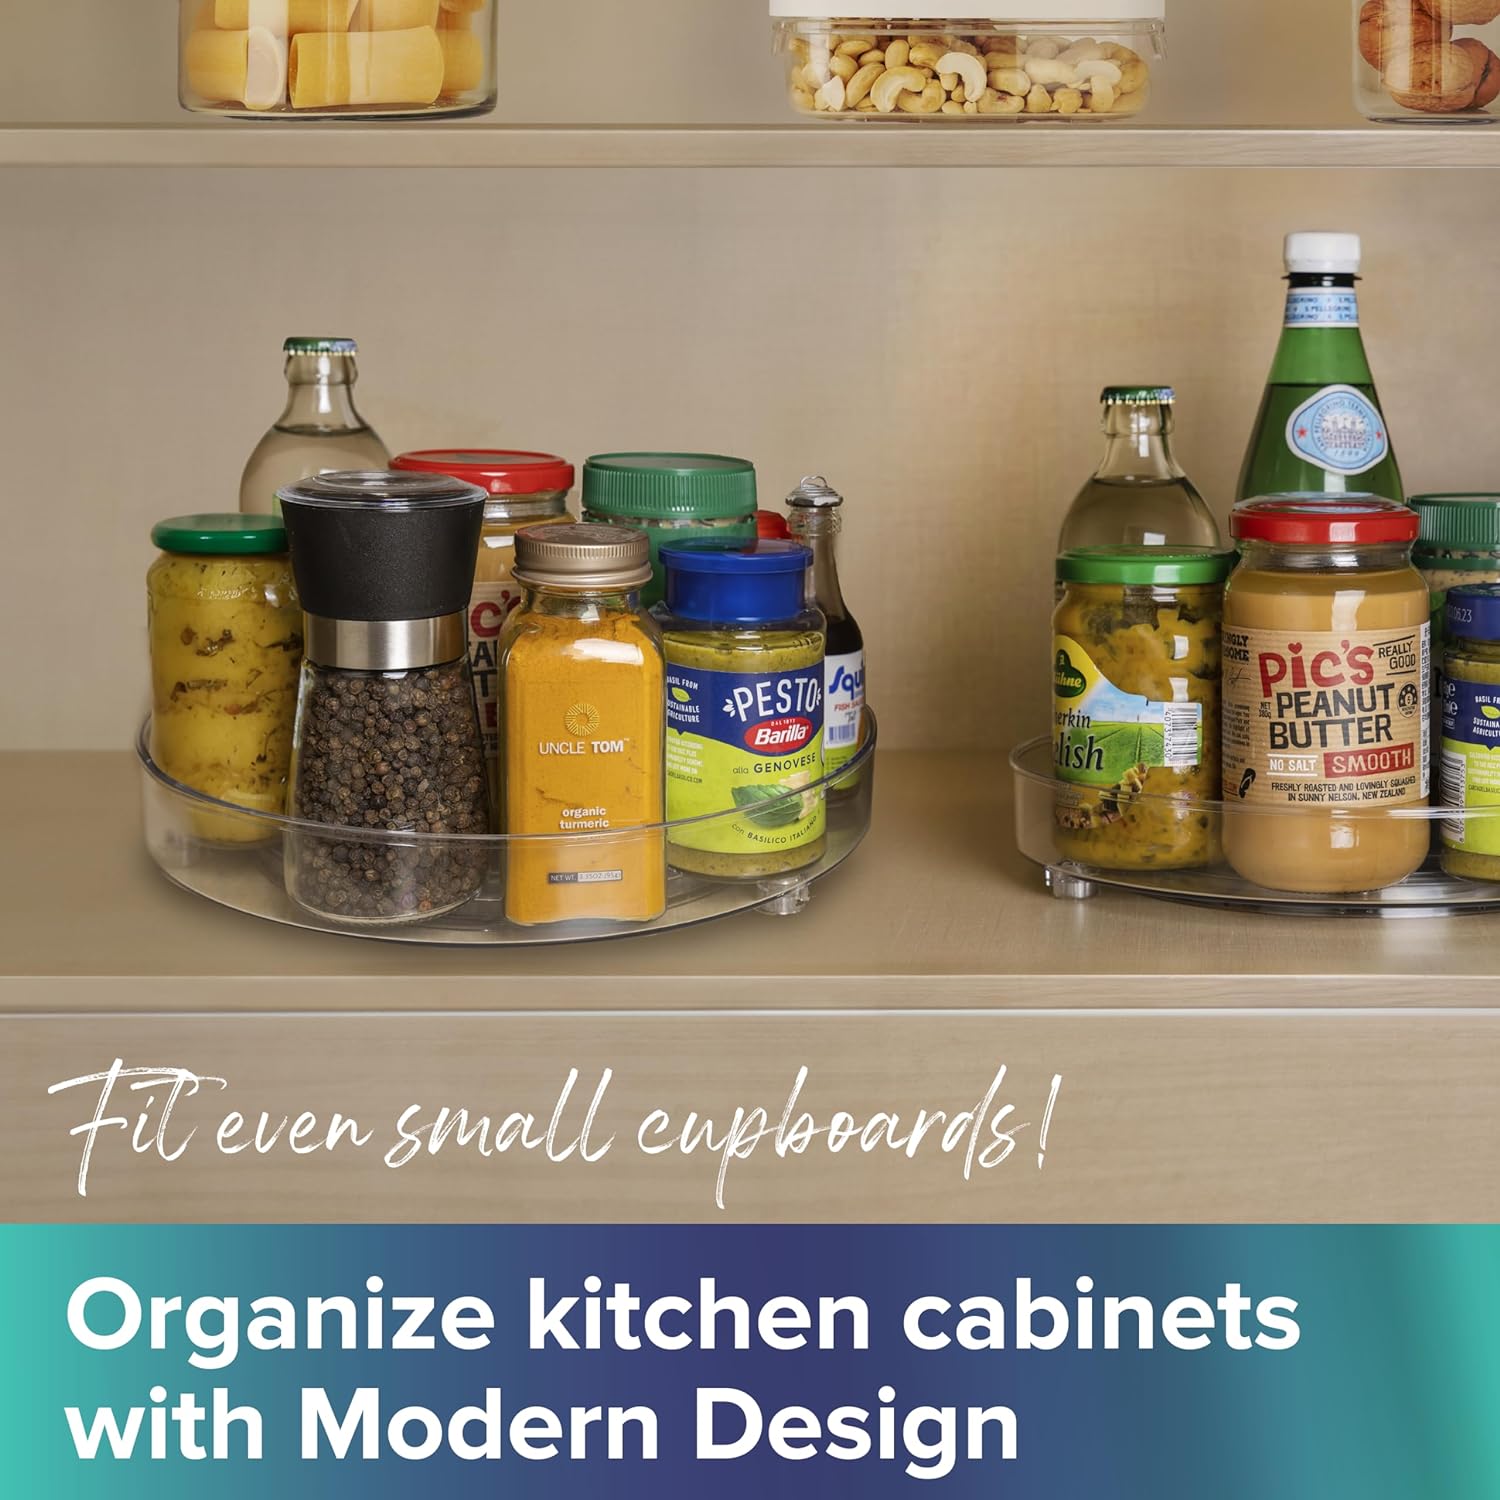 a shelf with food and spices with text: 'PESTO pic's PEANUT UNCLE TOM Barilla erkin BUTTER GENOVESE NO SALT SMOOTH organic turmeric BASILICO NET even small ! Organize kitchen cabinets with Modern Design'